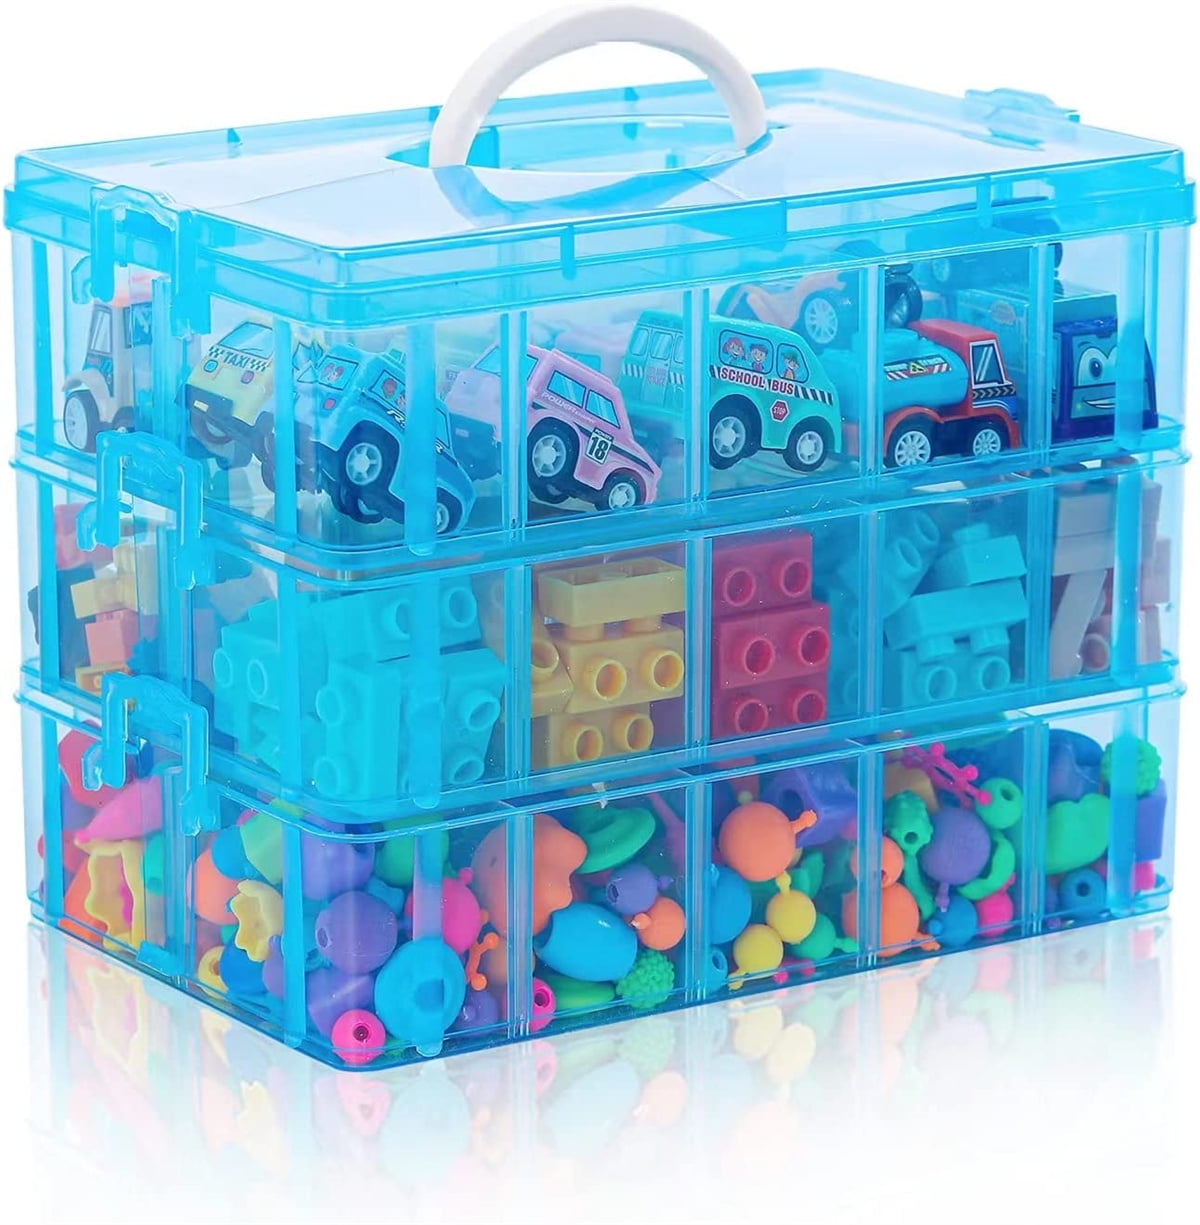 3T6B 9 Inch Portable Toy Organizers and Storage Case Tool Box, Bins &  Things Storage Container with Removable Tray, Lego organizers and storage  for